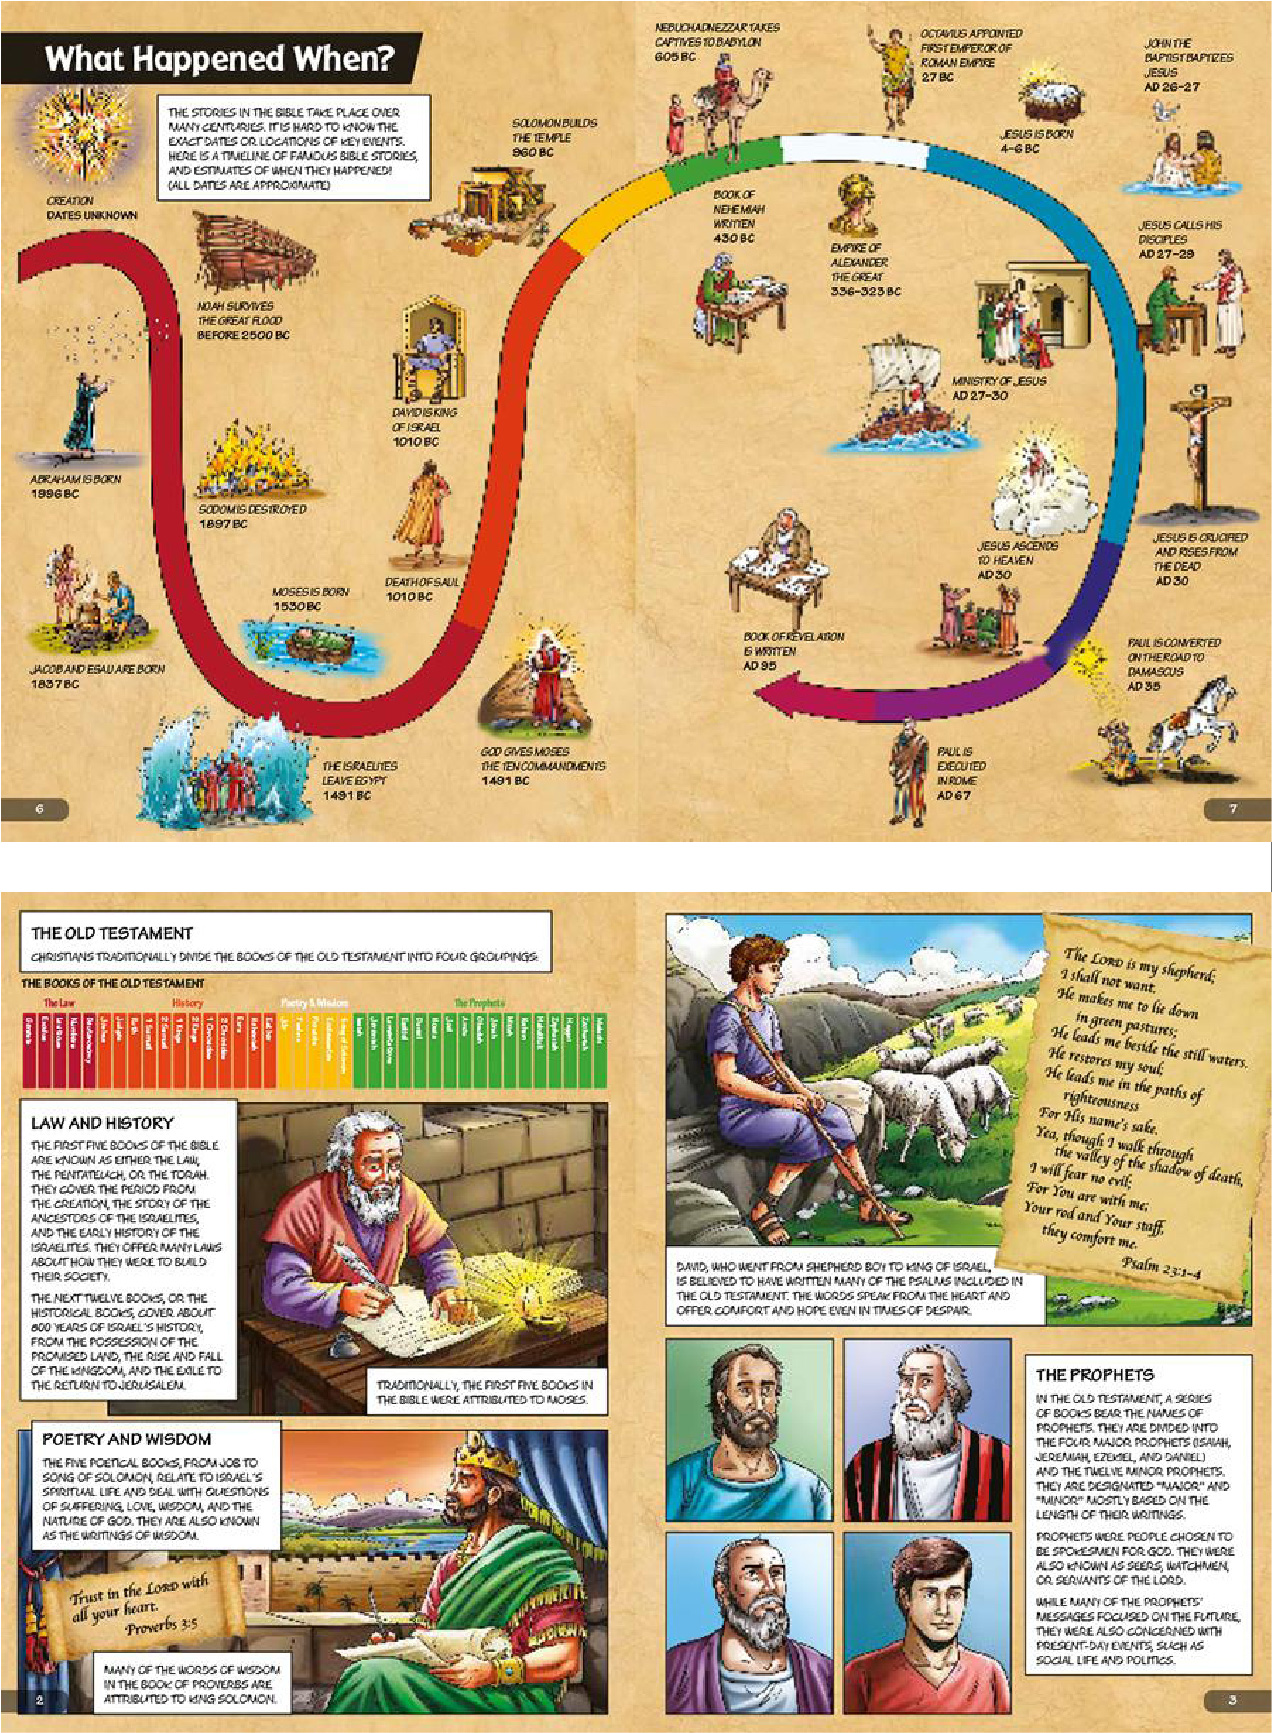 Sample student book pages showing a timeline of key events from the Bible and information about the Old Testament, from Bibleforce, The First Hero's Bible